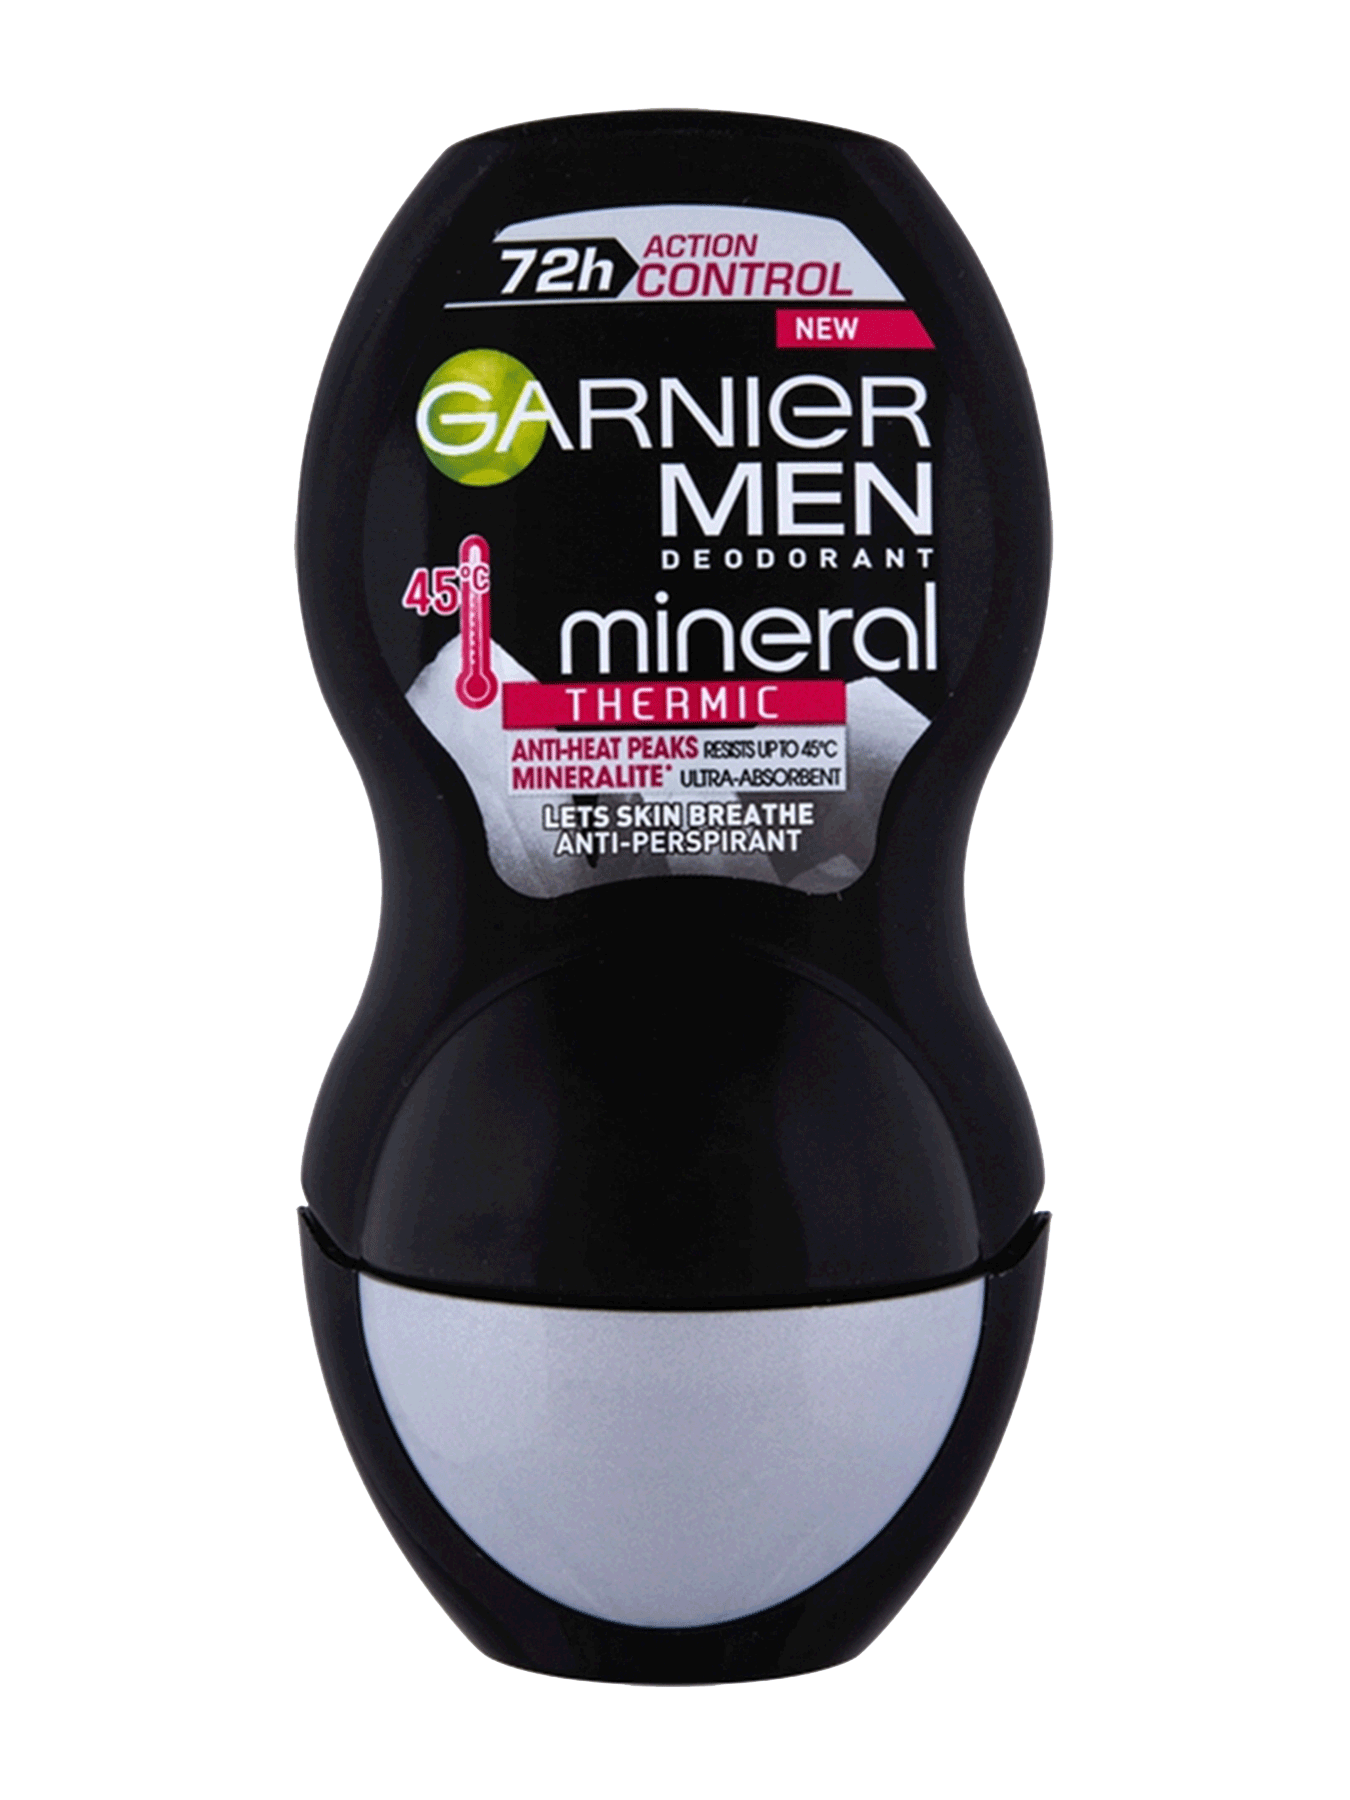 Garnier Mineral Deo Action Control Thermic men roll-on